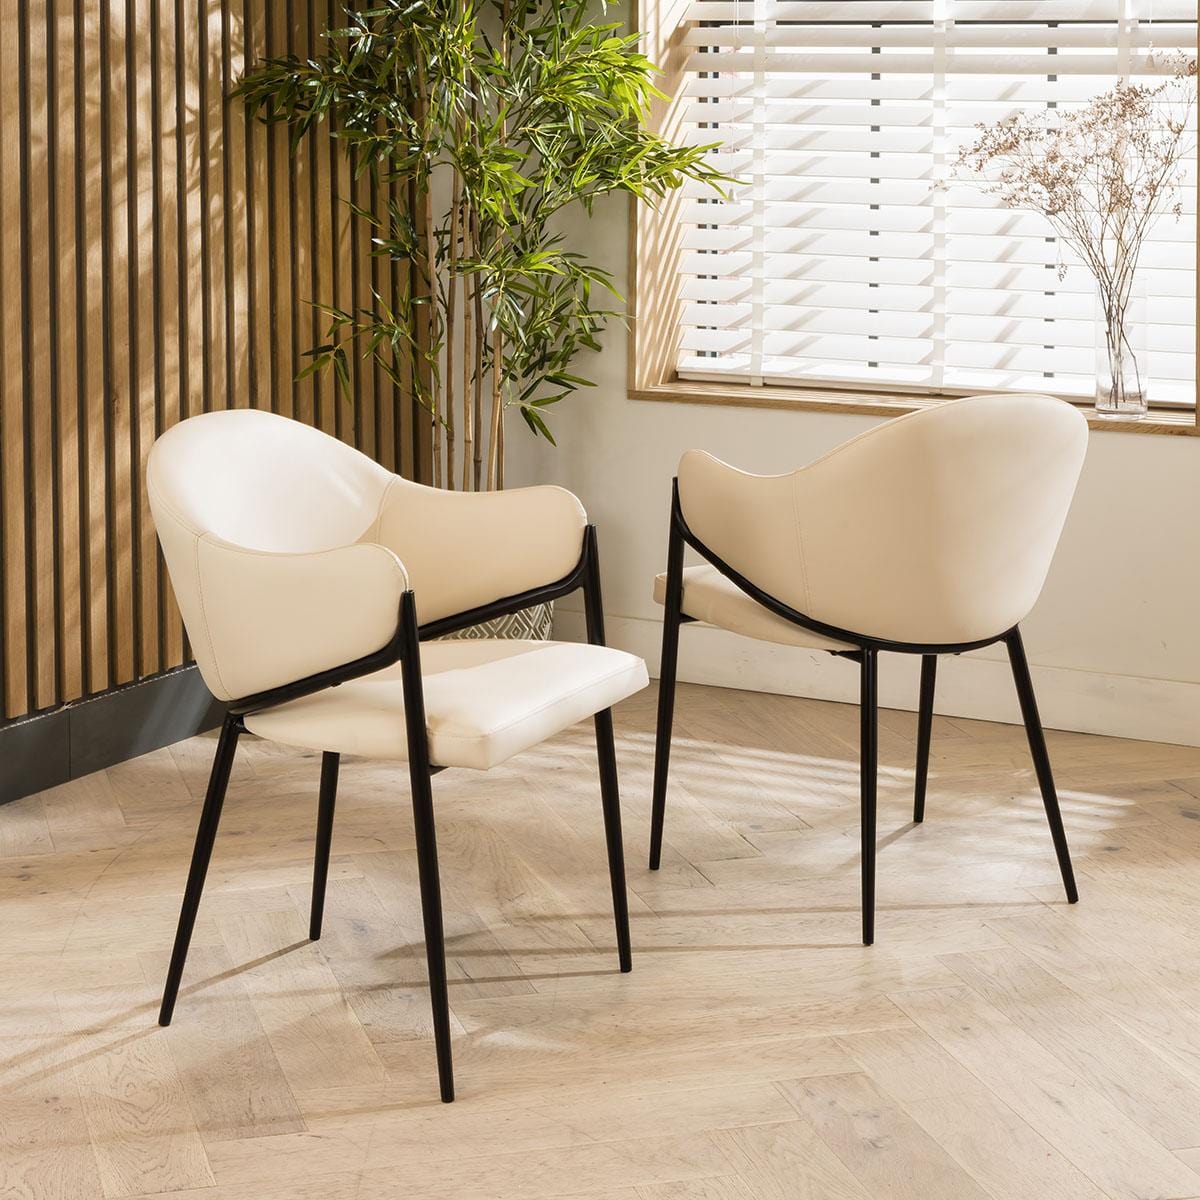 Quatropi Ashley Natural Solid Round Wooden Dining Set For 4 Cream Clay